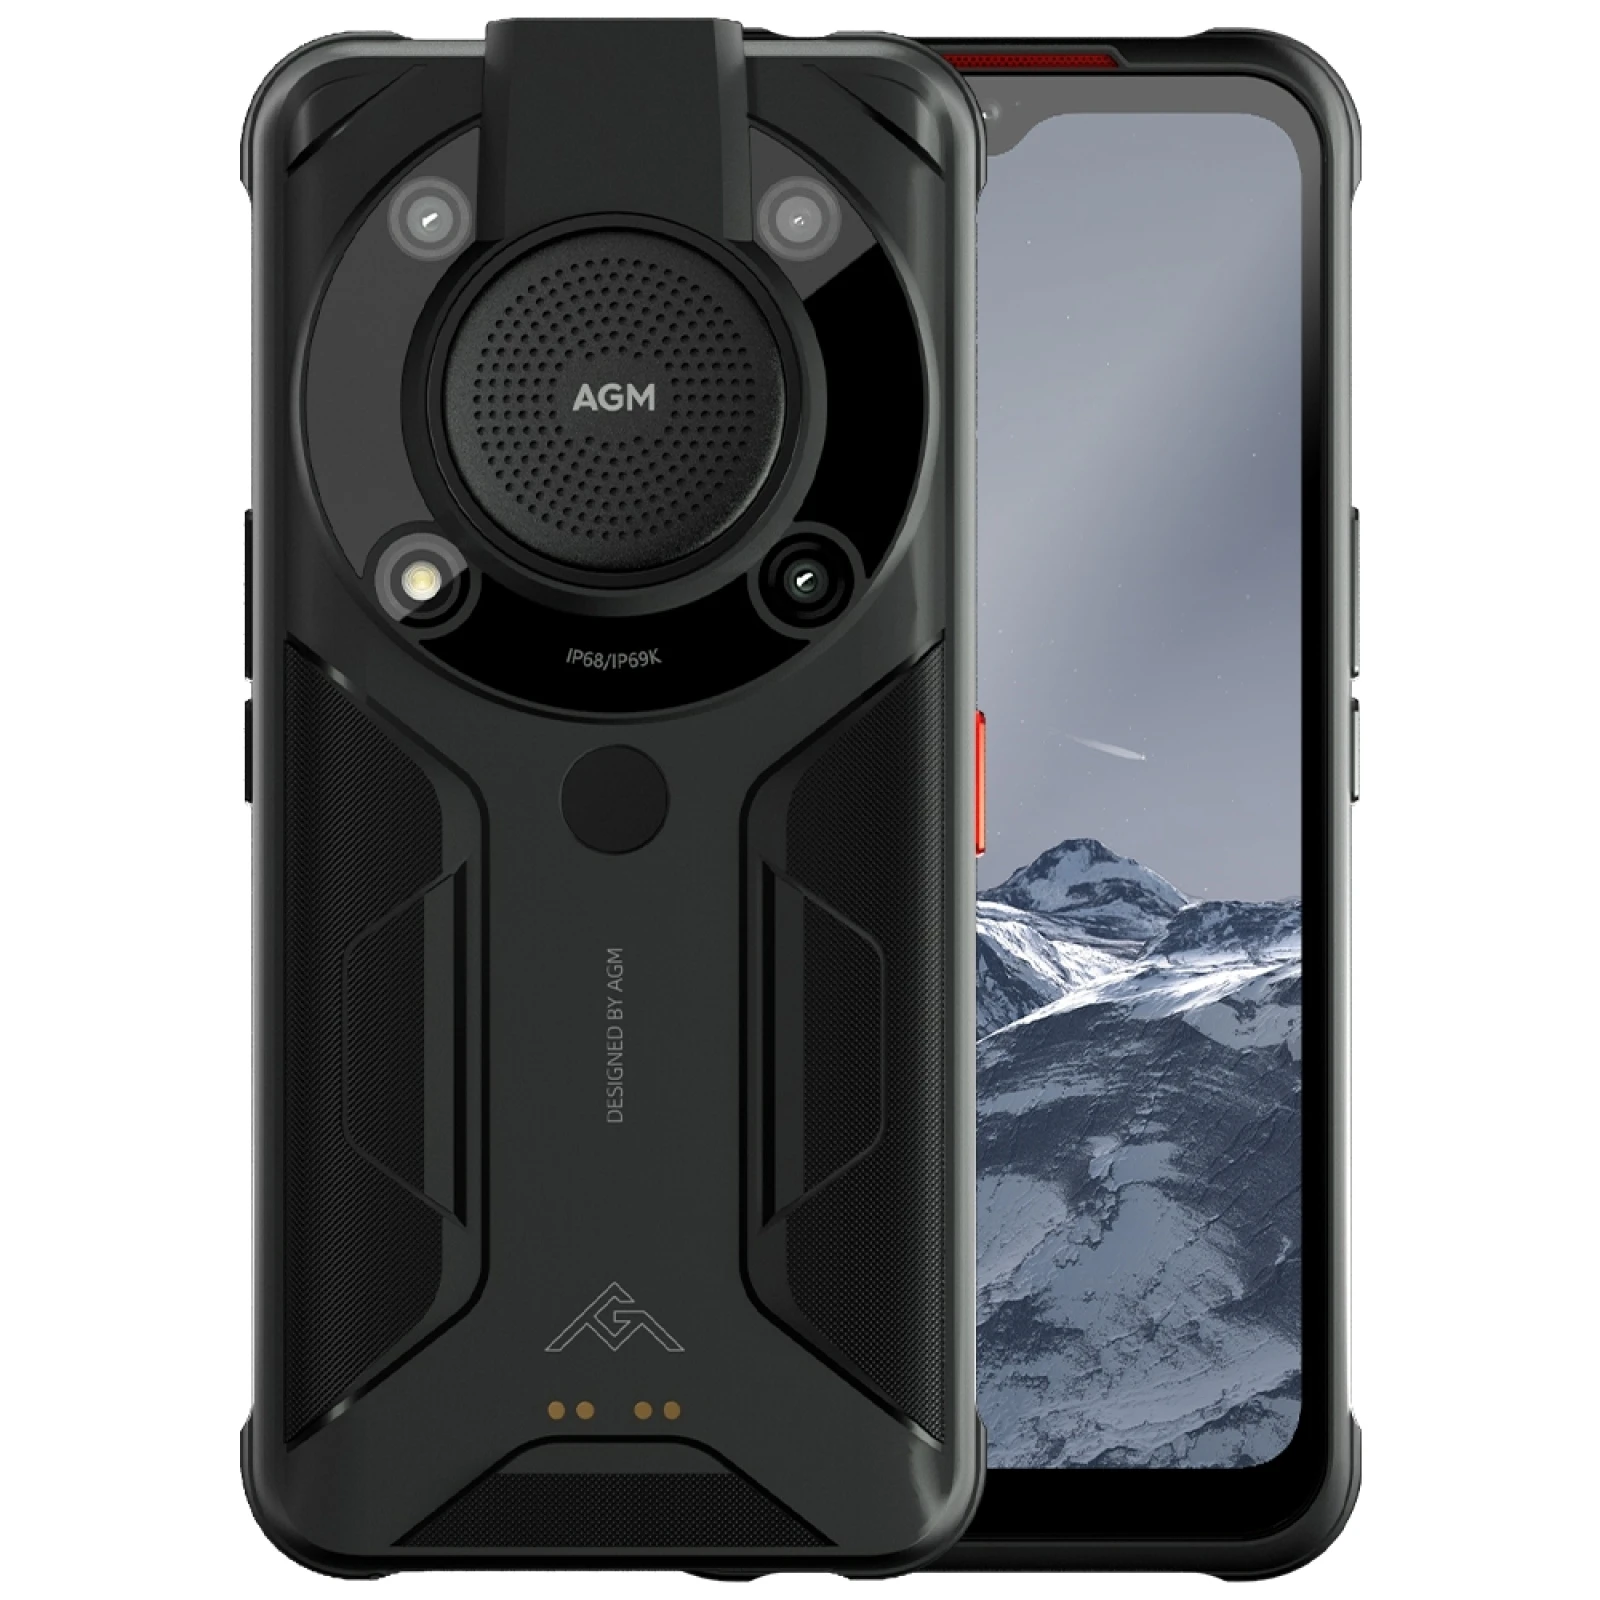 8gb ddr3 AGM Glory G1 Rugged Smartphone 6.53" Android 11 Snapdragon 480 Octa Core 8GB+256GB Night Vision Camera NFC 6200mAh 5G Mobile laptop 8gb ram